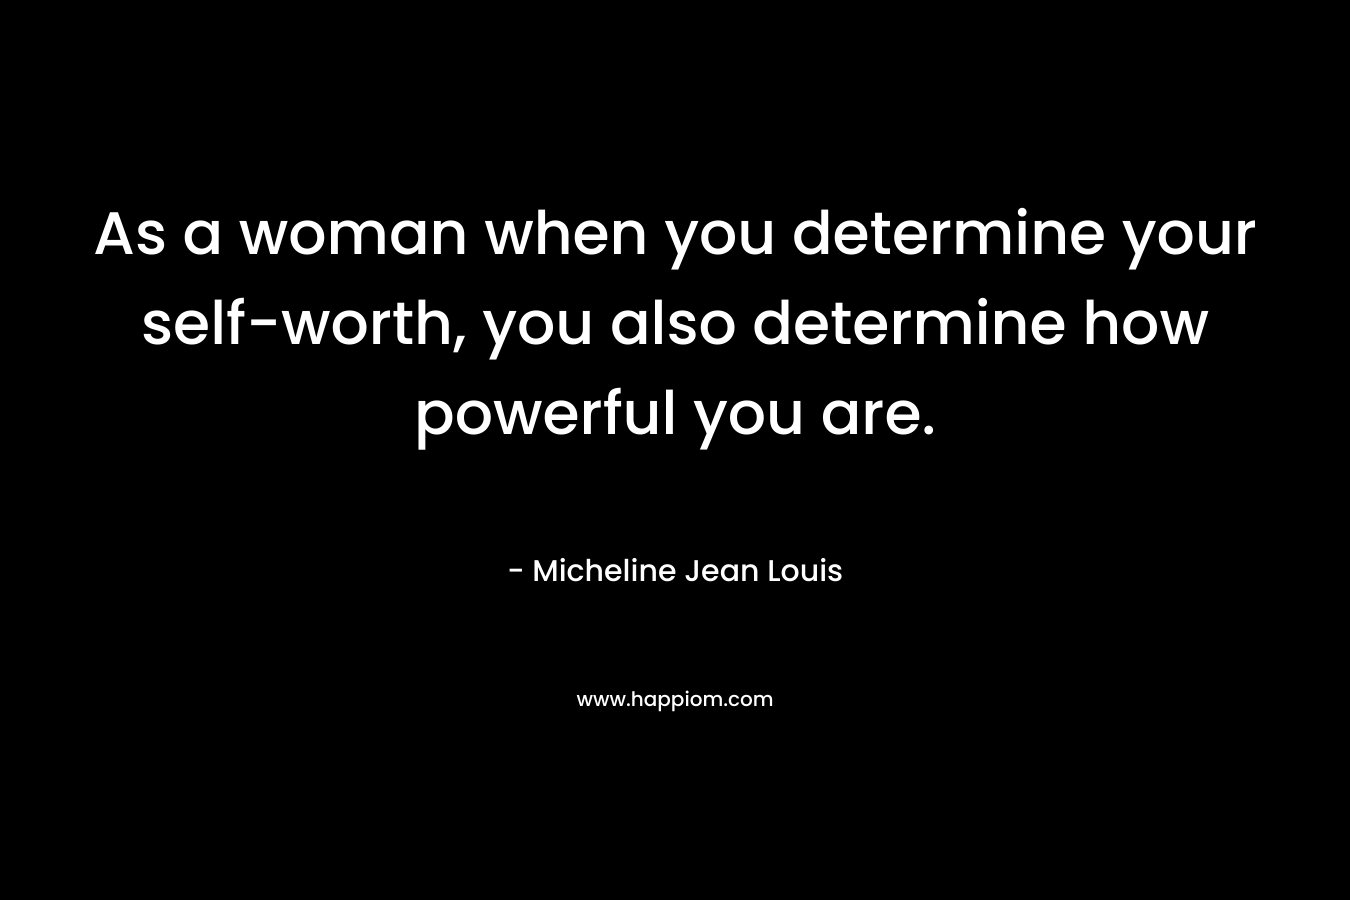 As a woman when you determine your self-worth, you also determine how powerful you are. – Micheline Jean Louis